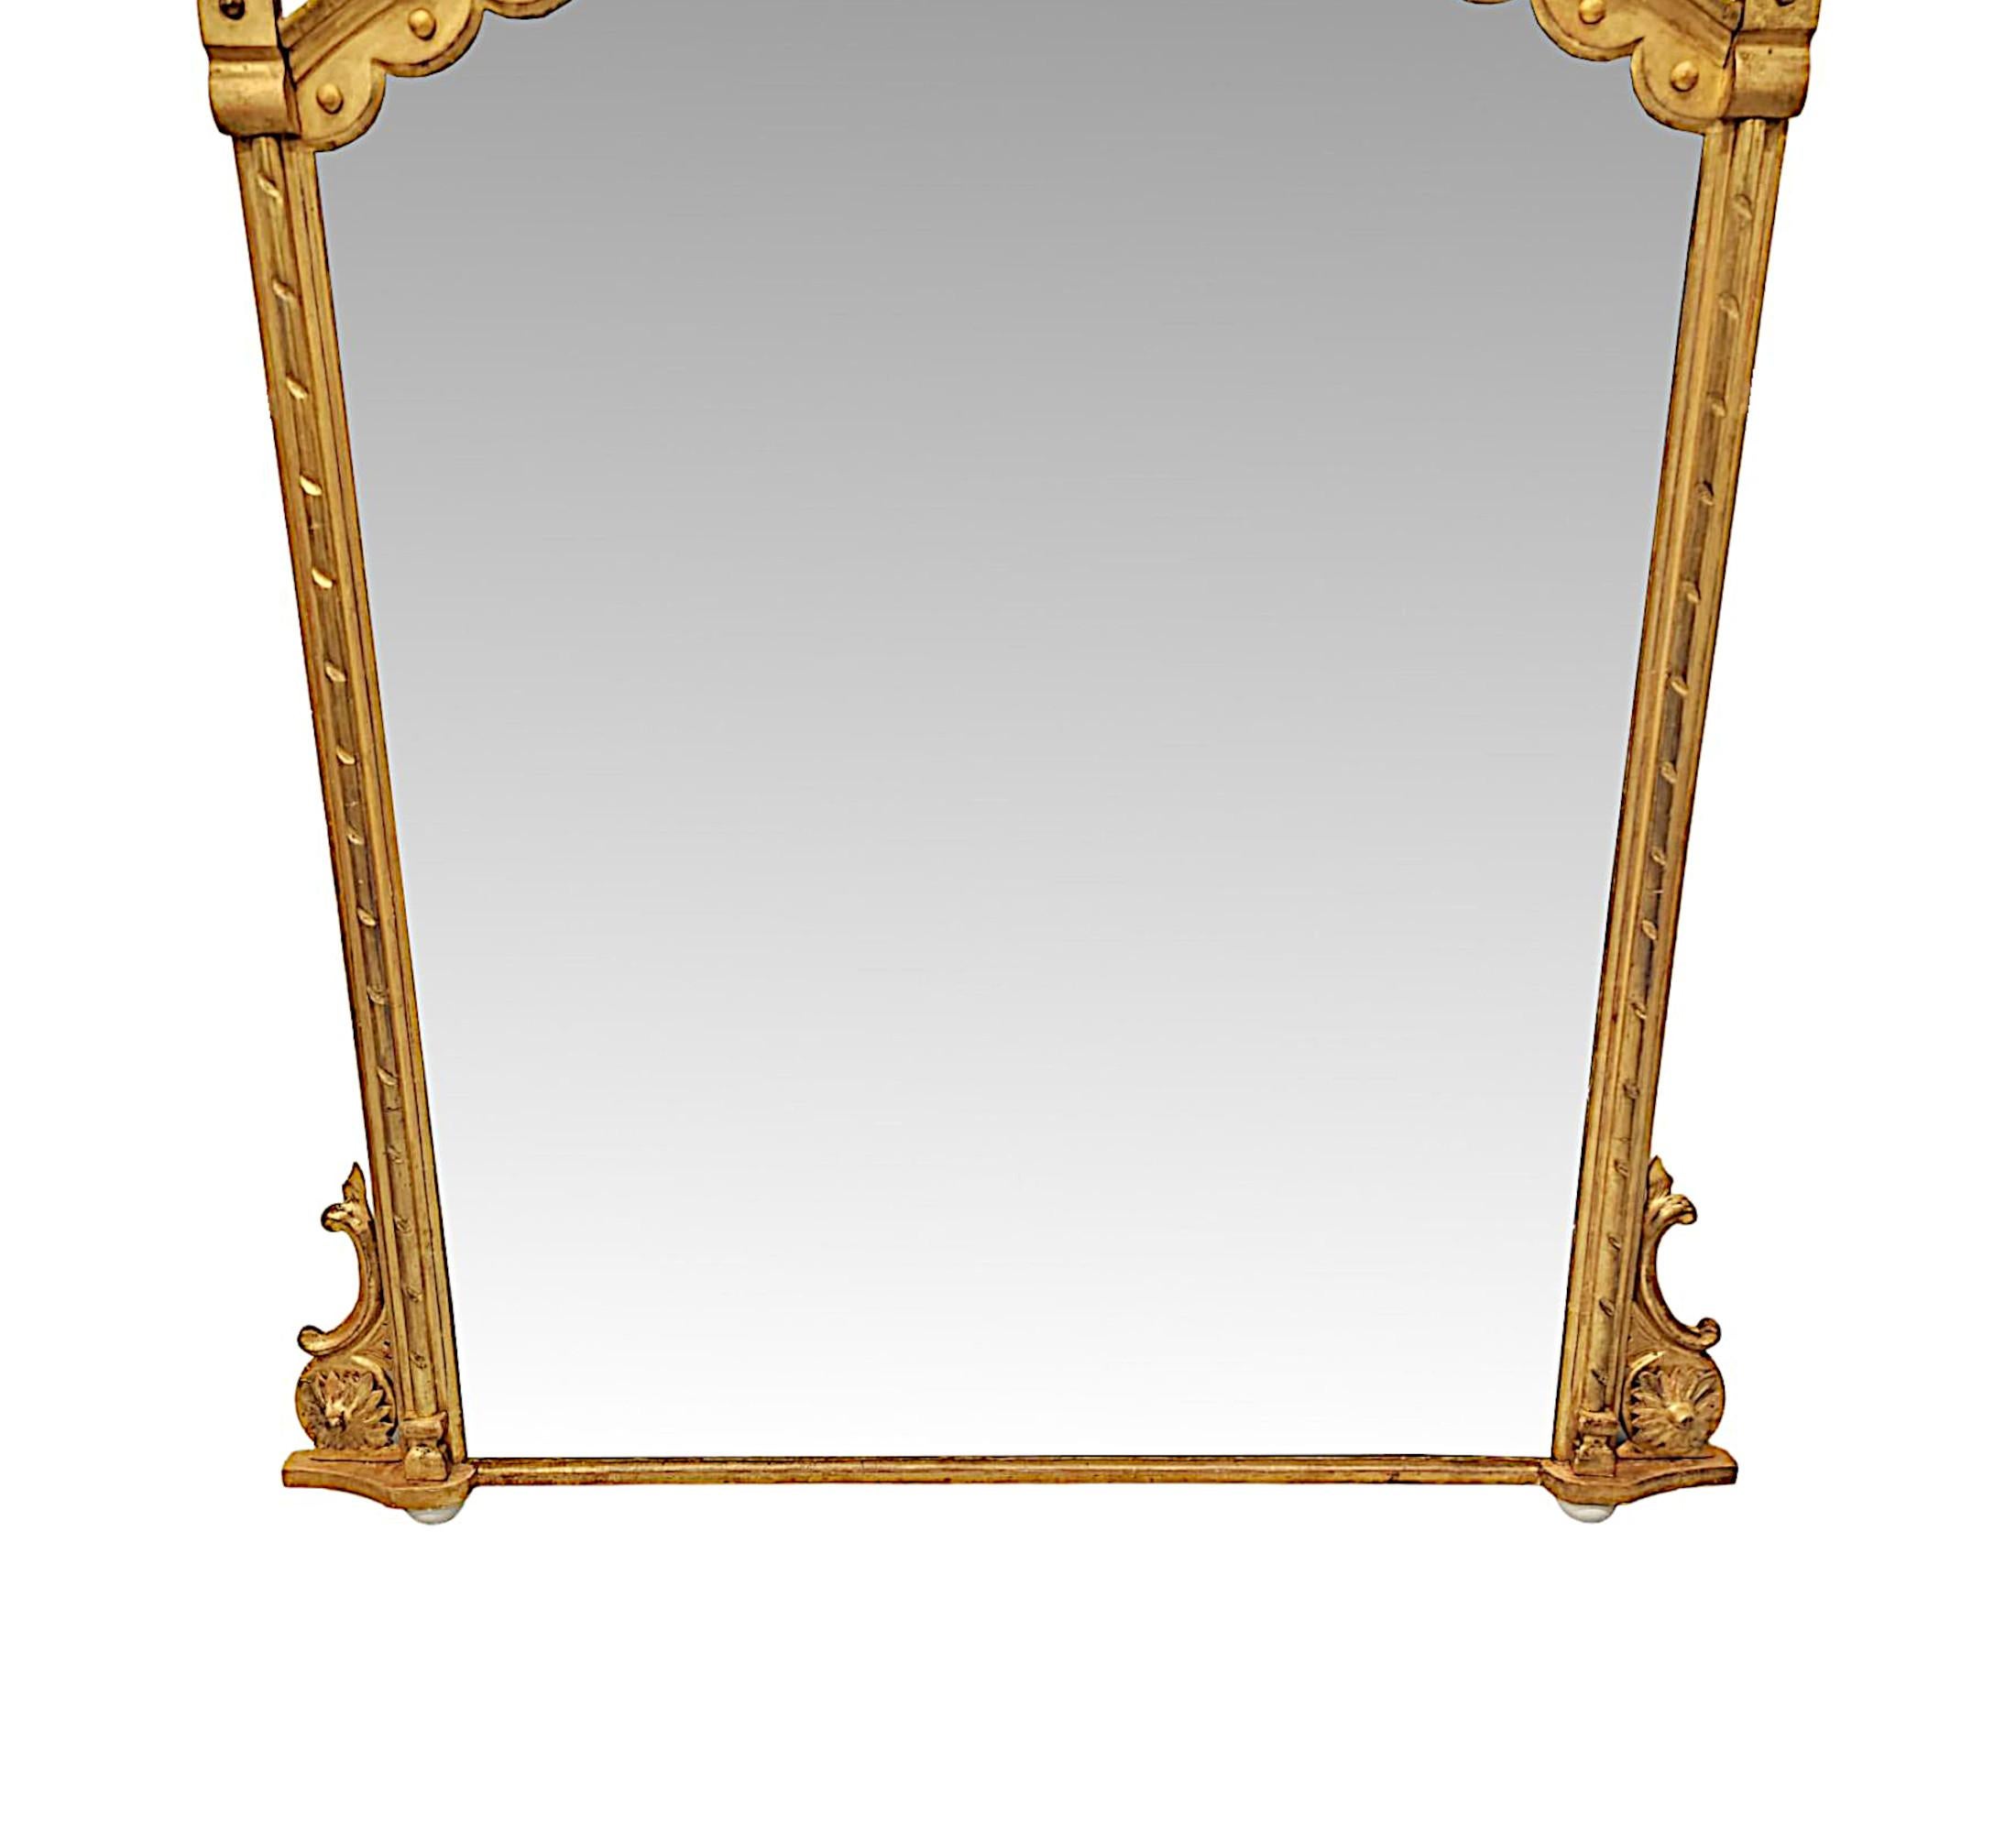 Glass A Fabulous 19th Century Giltwood Overmantel Mirror For Sale